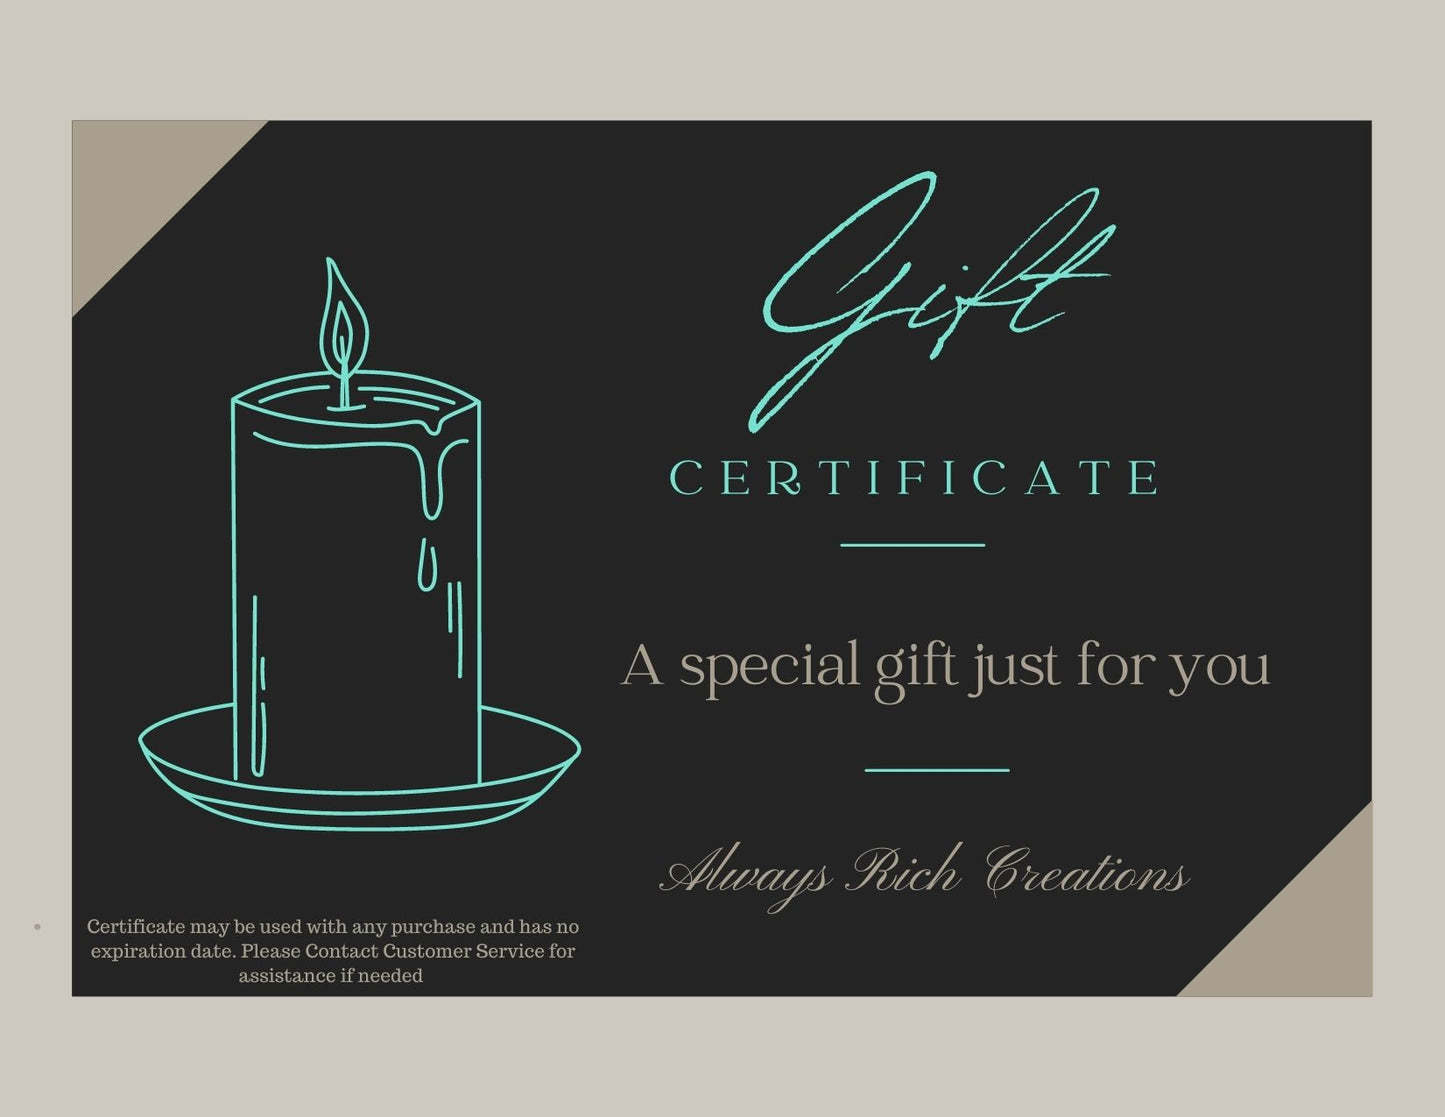 Always Rich Creations Gift Certificate